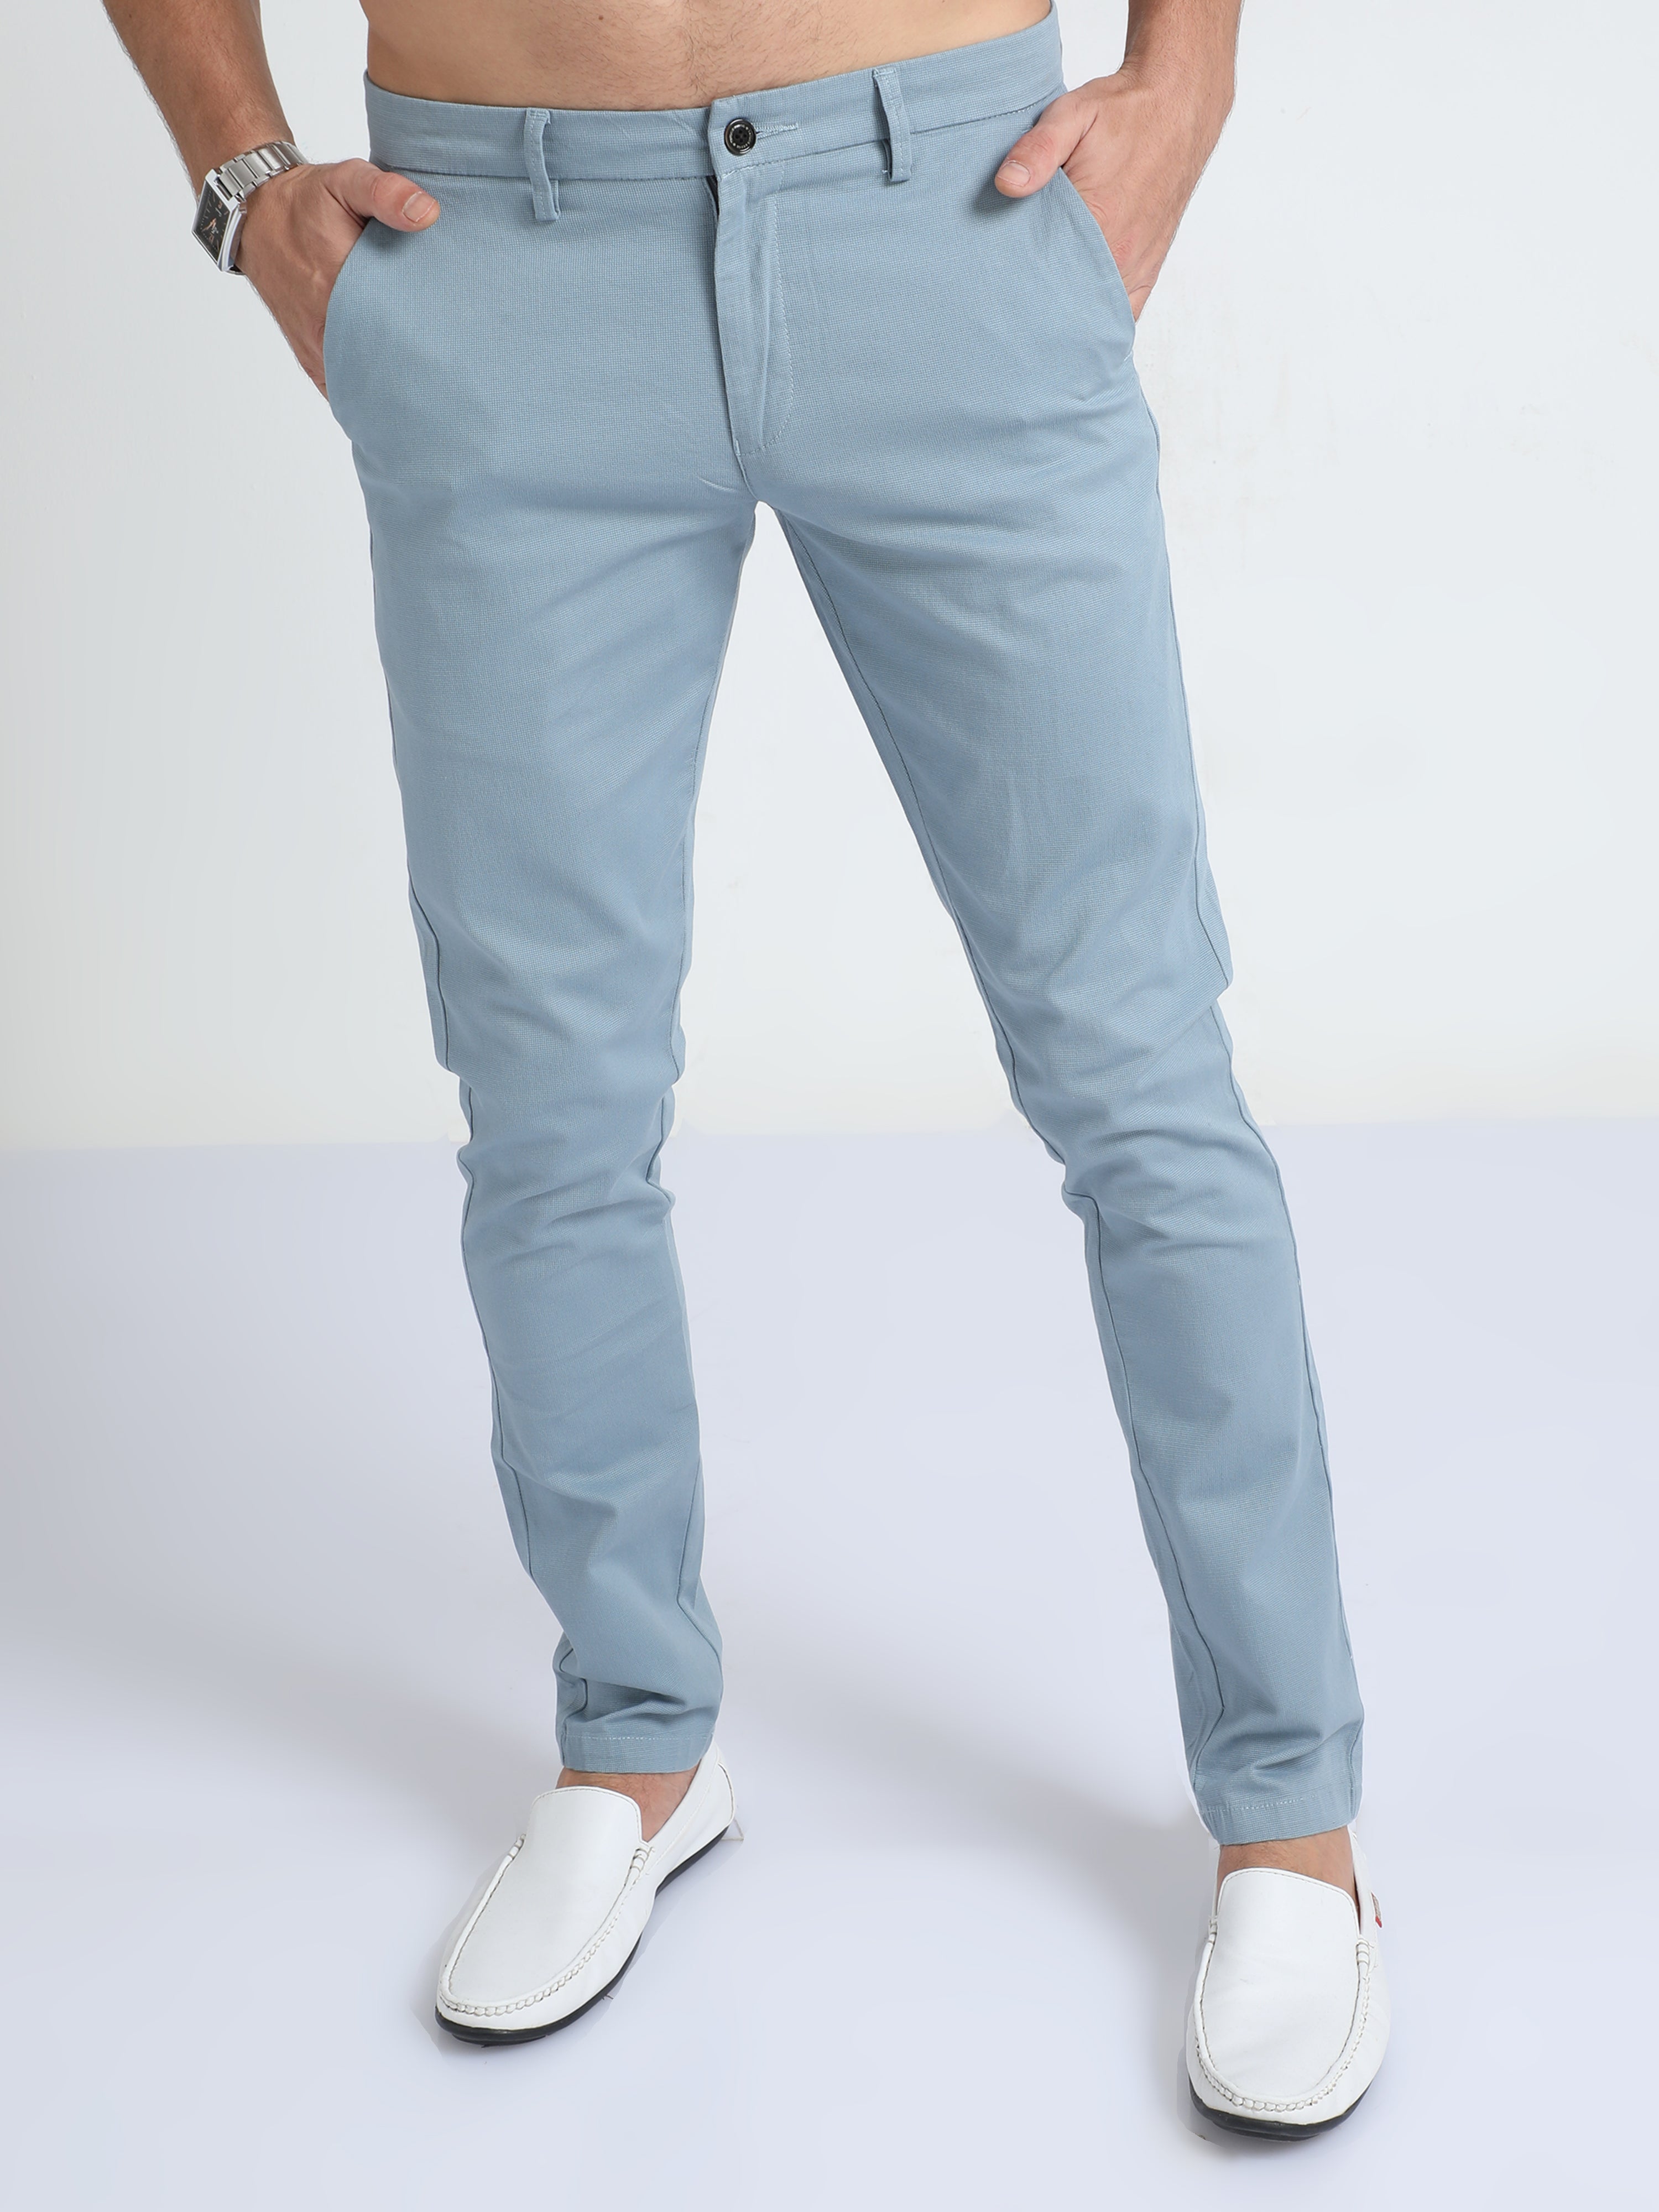 Shop Stylish Grey Colour Chinos for Men Online in India